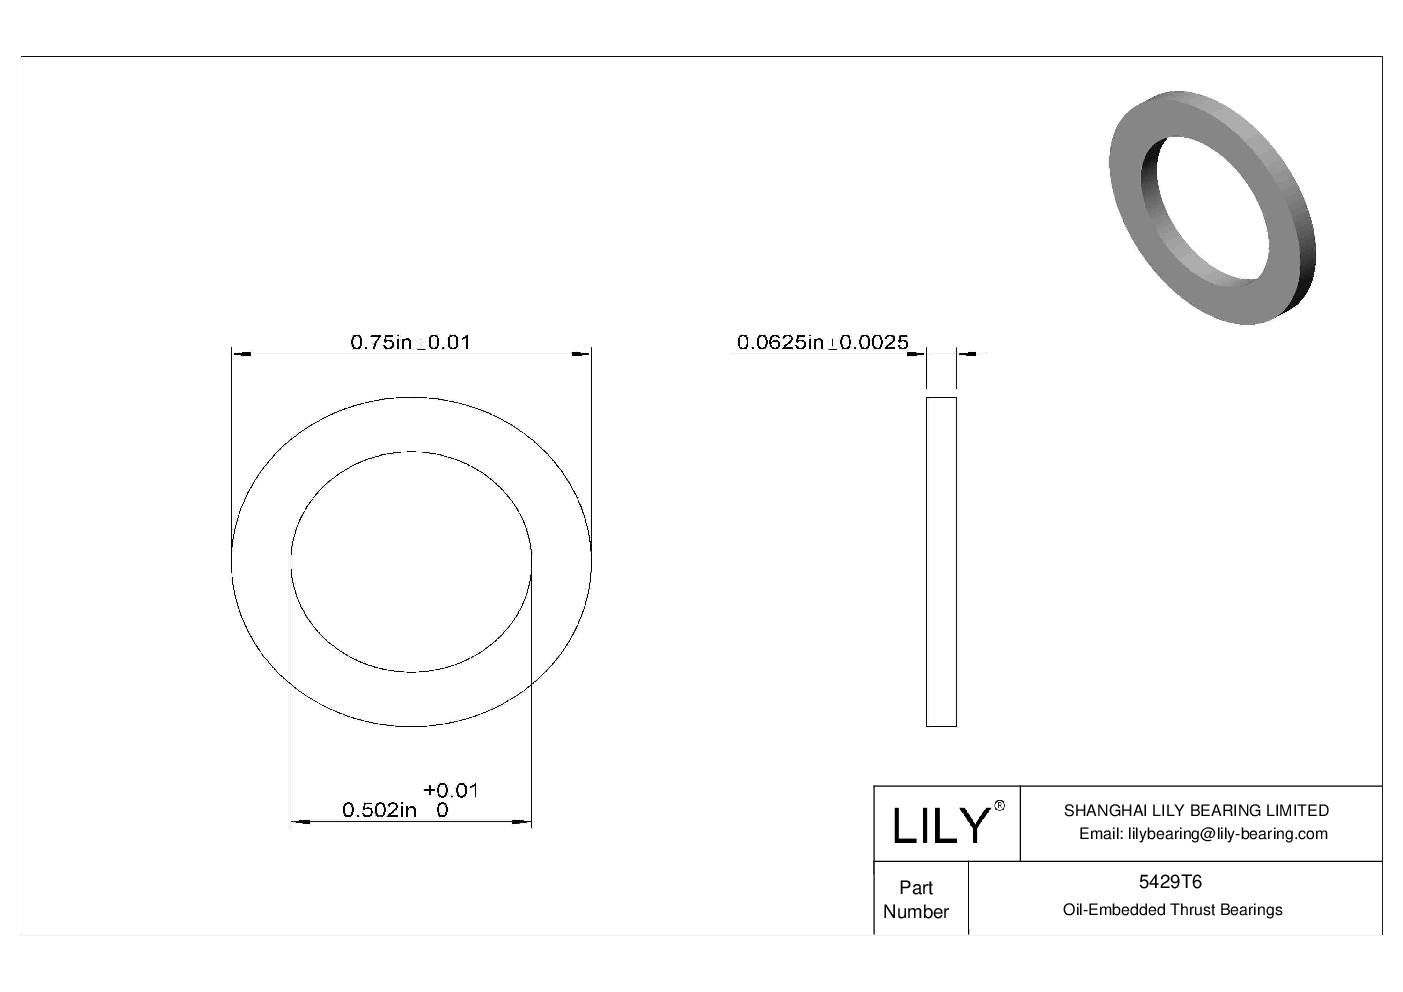 FECJTG Food Industry Oil-Embedded Thrust Bearings cad drawing